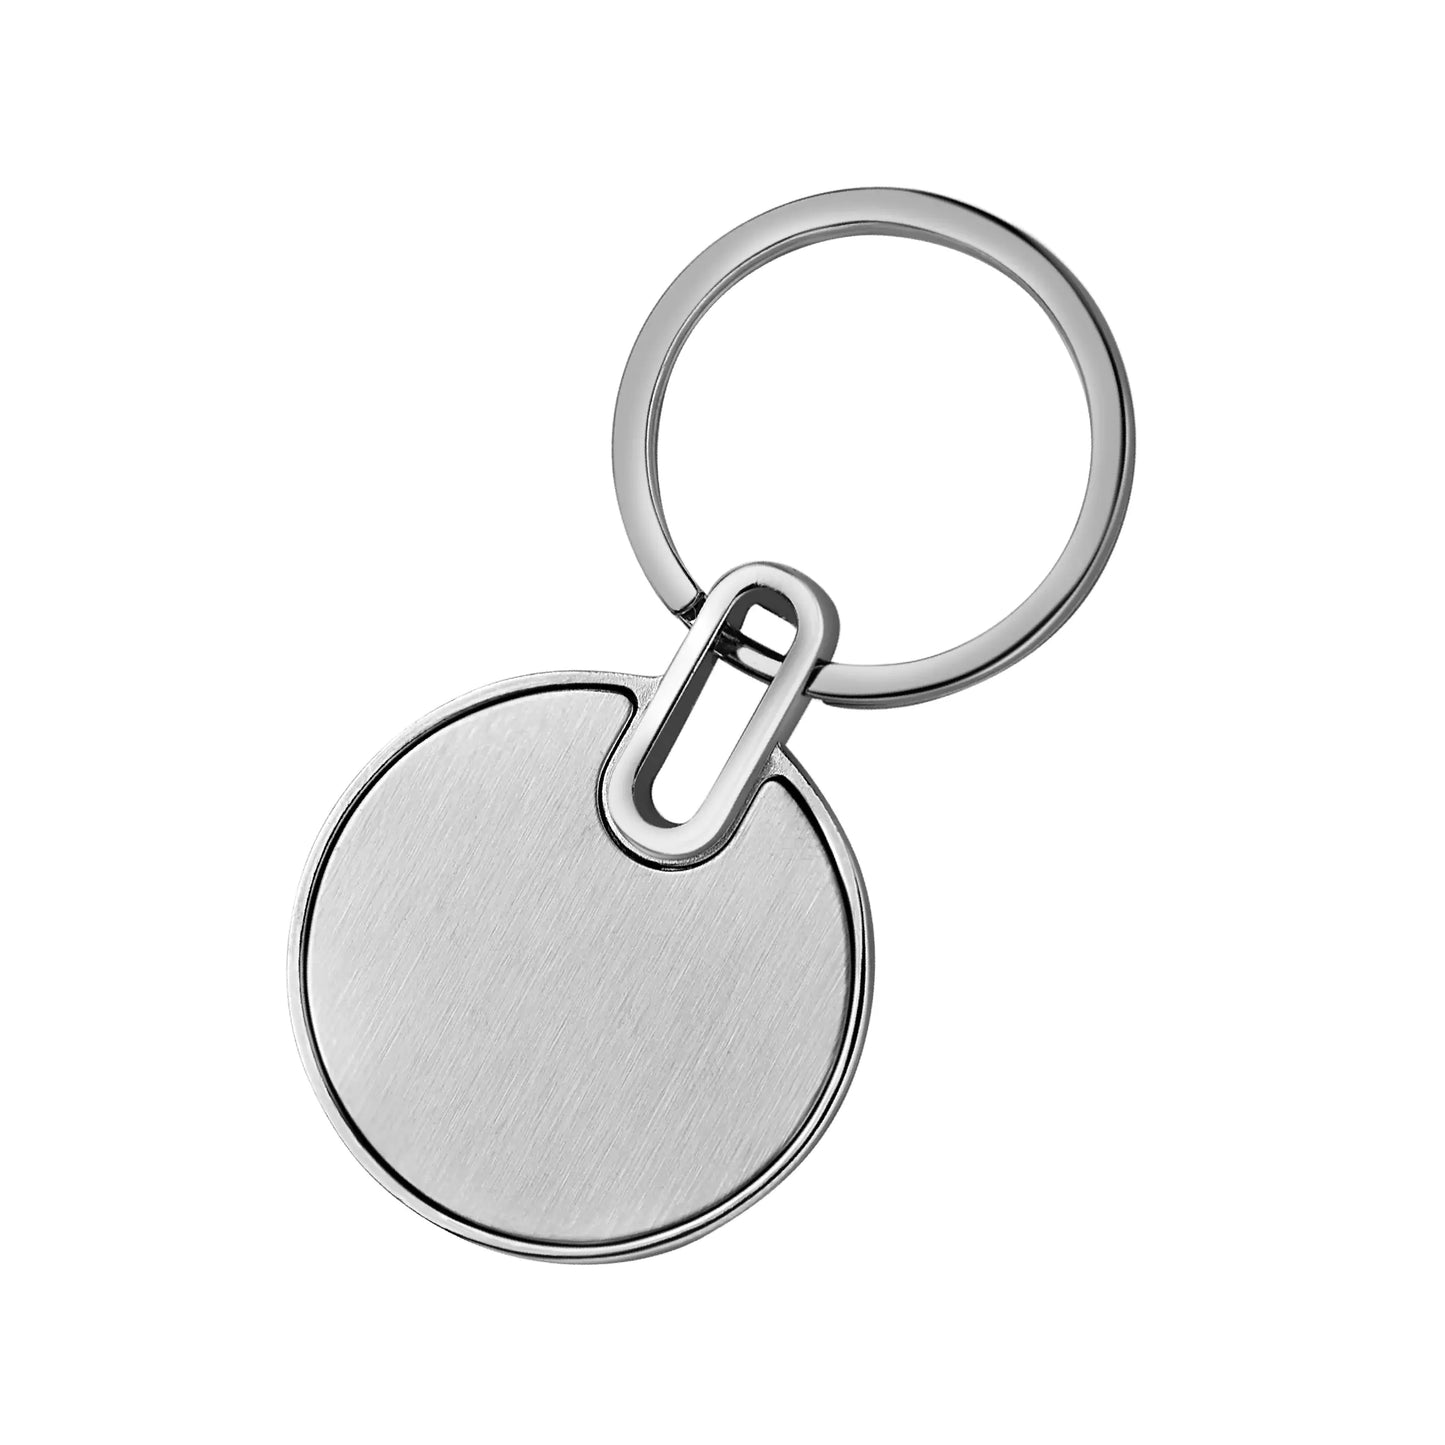 Round Steel Finish Metal Keychain - For Employee, Client, Dealer, or Corporate Gifting, Events Promotional Freebie JKC5